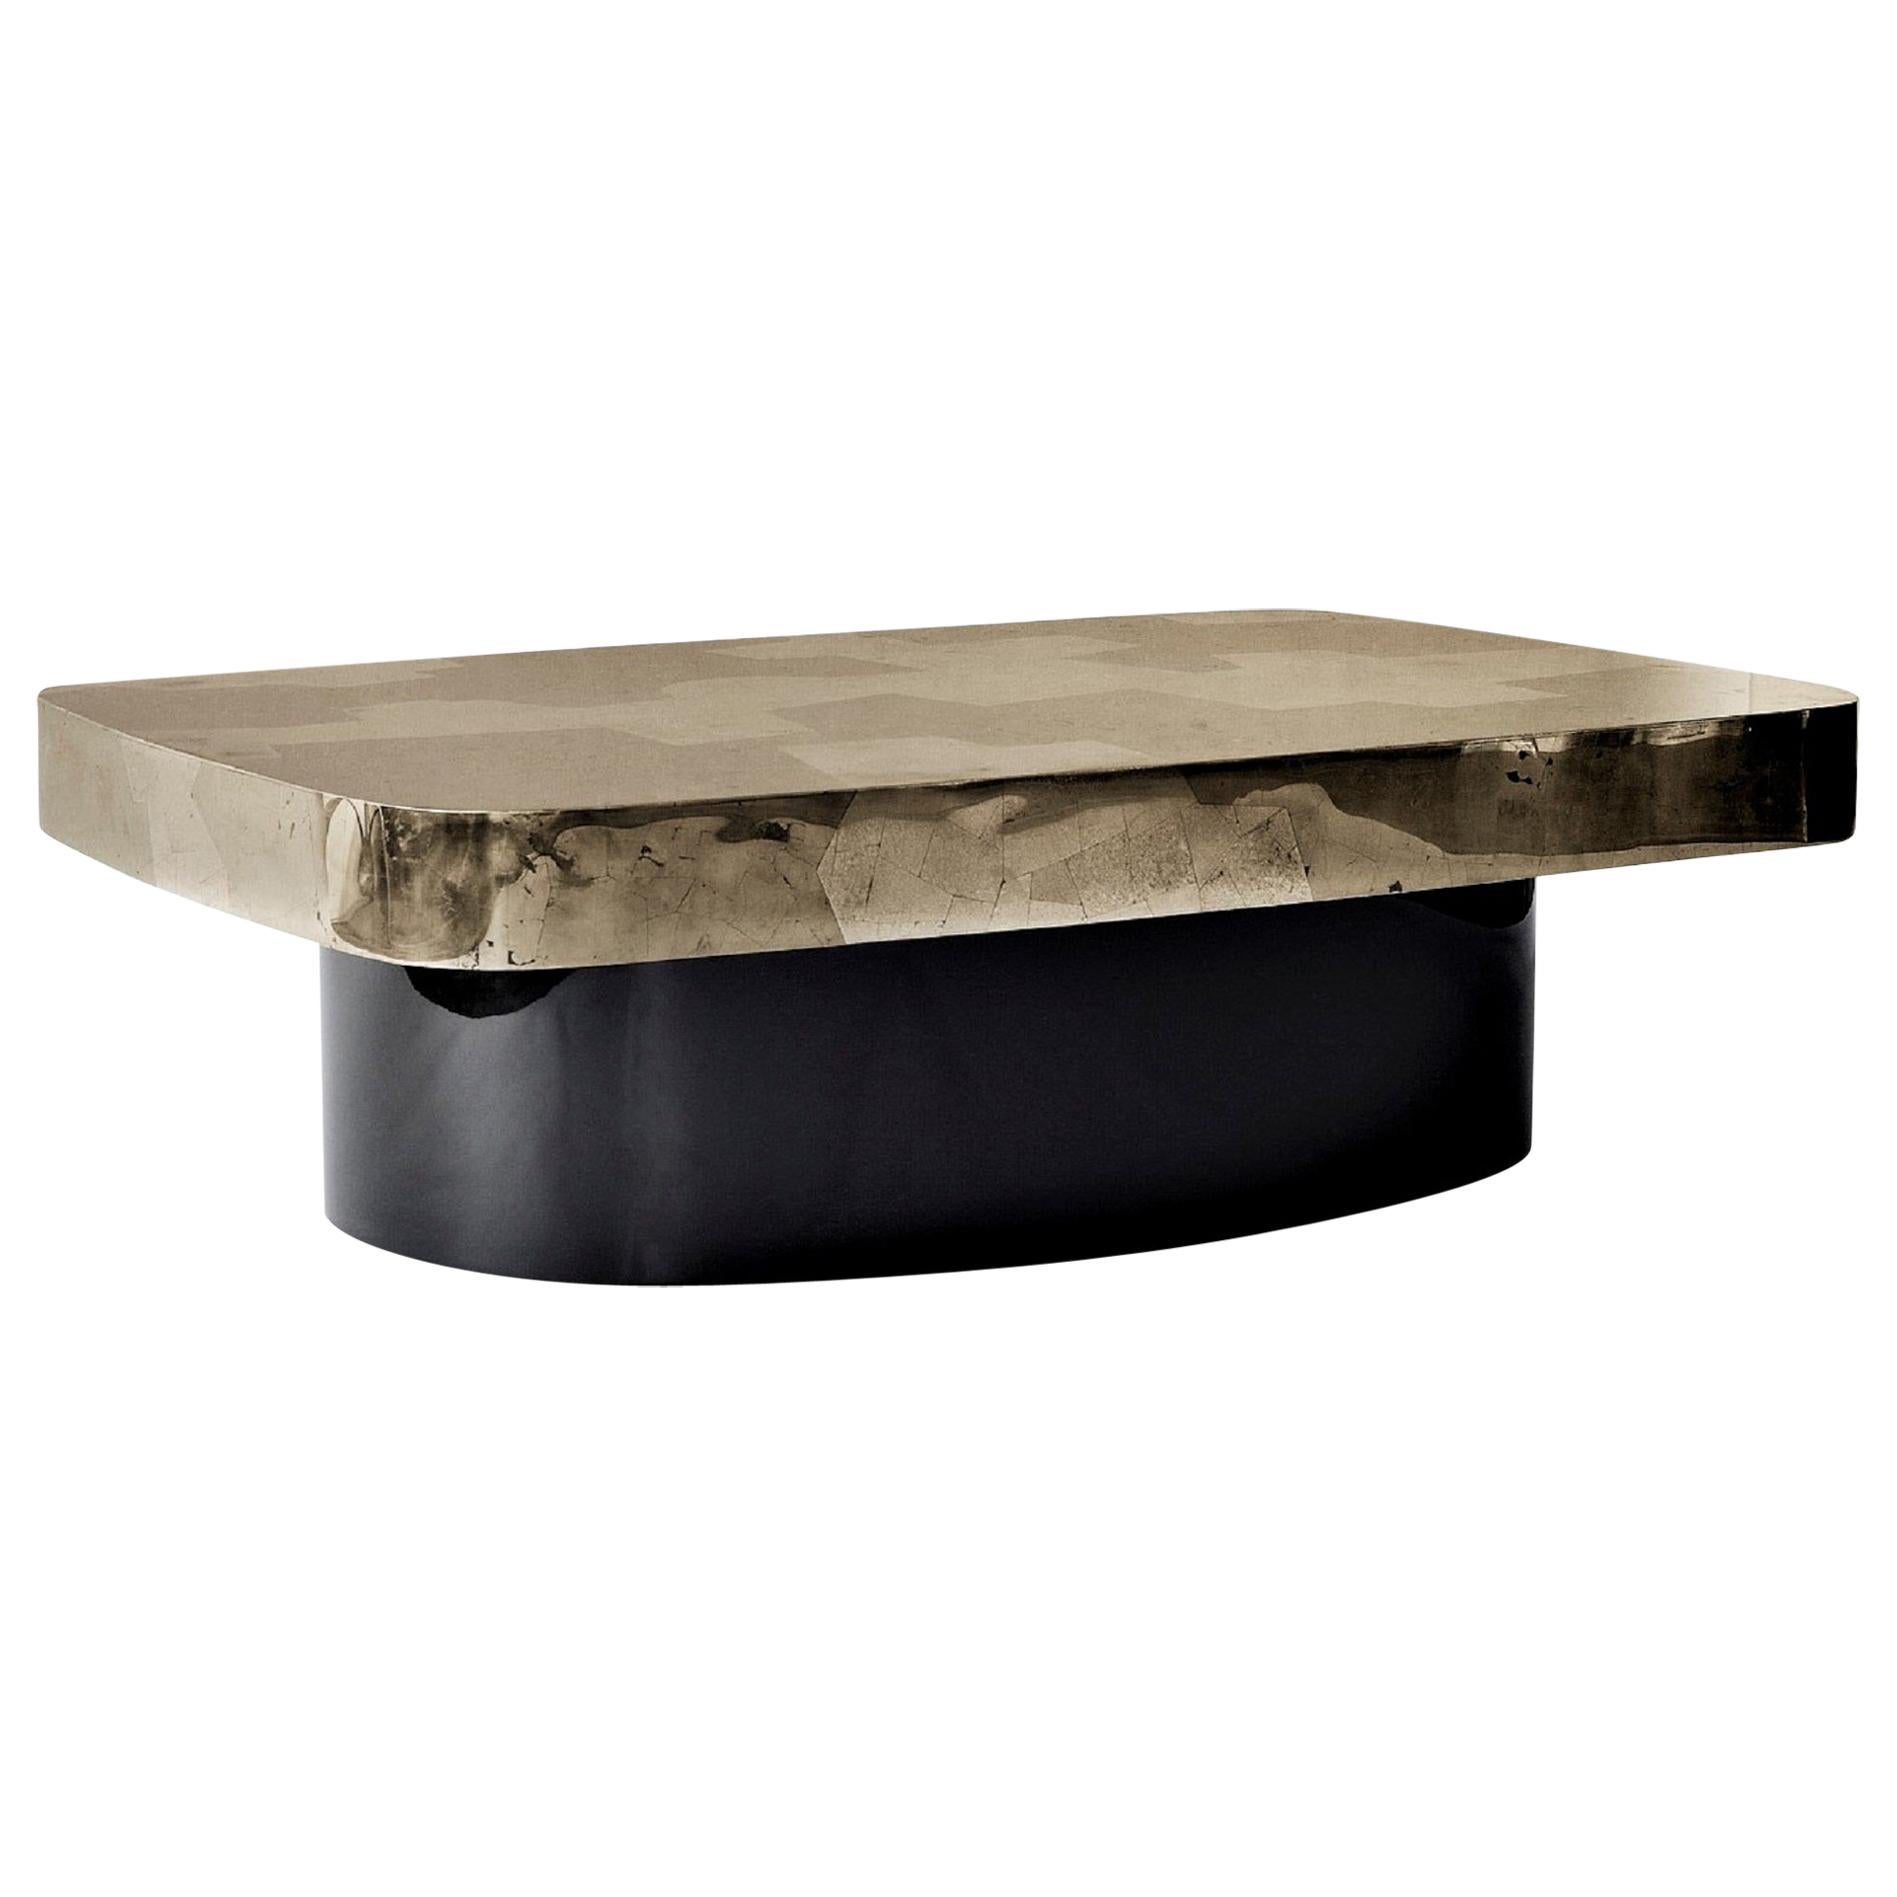 The Emil coffee or cocktail table features a hand-laid silver and golden pyrite top in a stunning, Brutalist-inspired design, supported by a glossy black lacquered wood base.